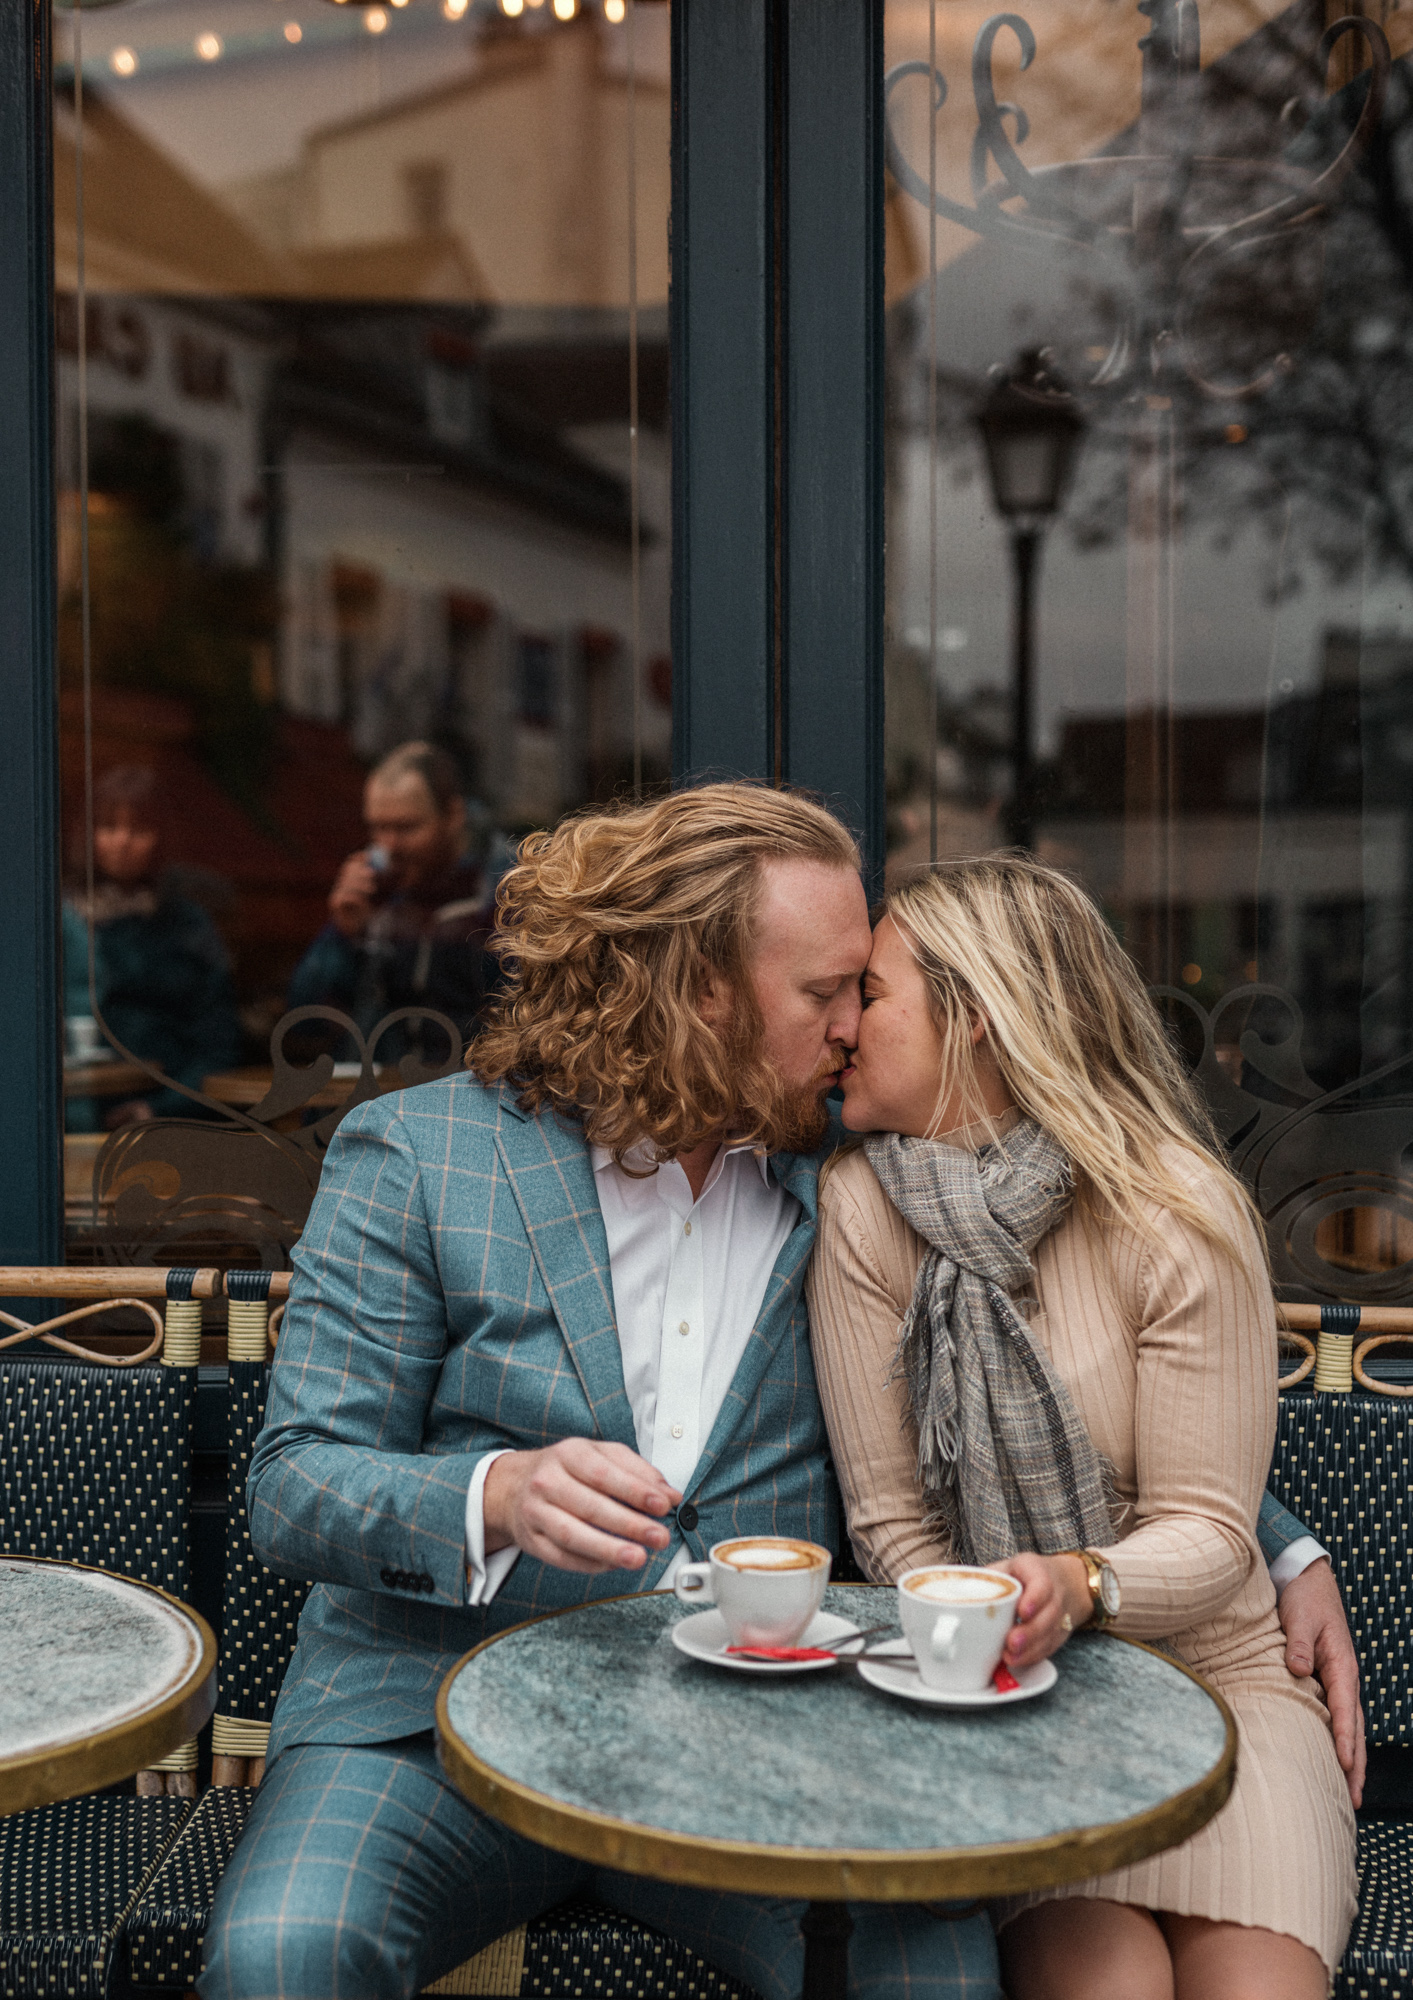 newly engaged couple kiss at cafre in montmartre in paris